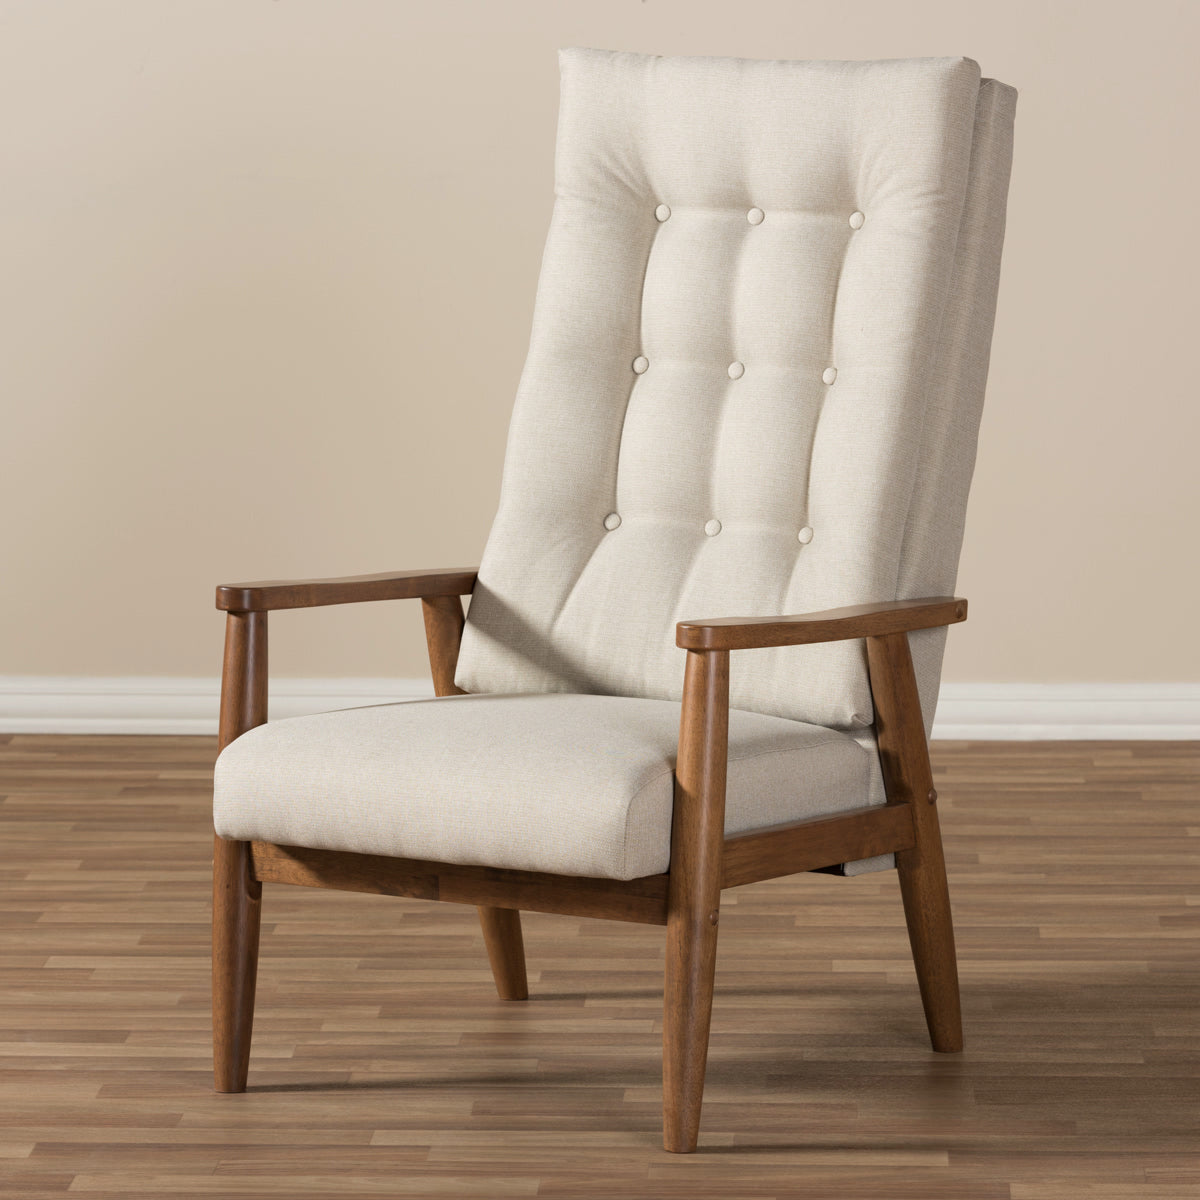 Baxton Studio Roxy Mid-Century Modern Walnut Brown Finish Wood and Light Beige Fabric Upholstered Button-Tufted High-Back Chair Baxton Studio-chairs-Minimal And Modern - 8